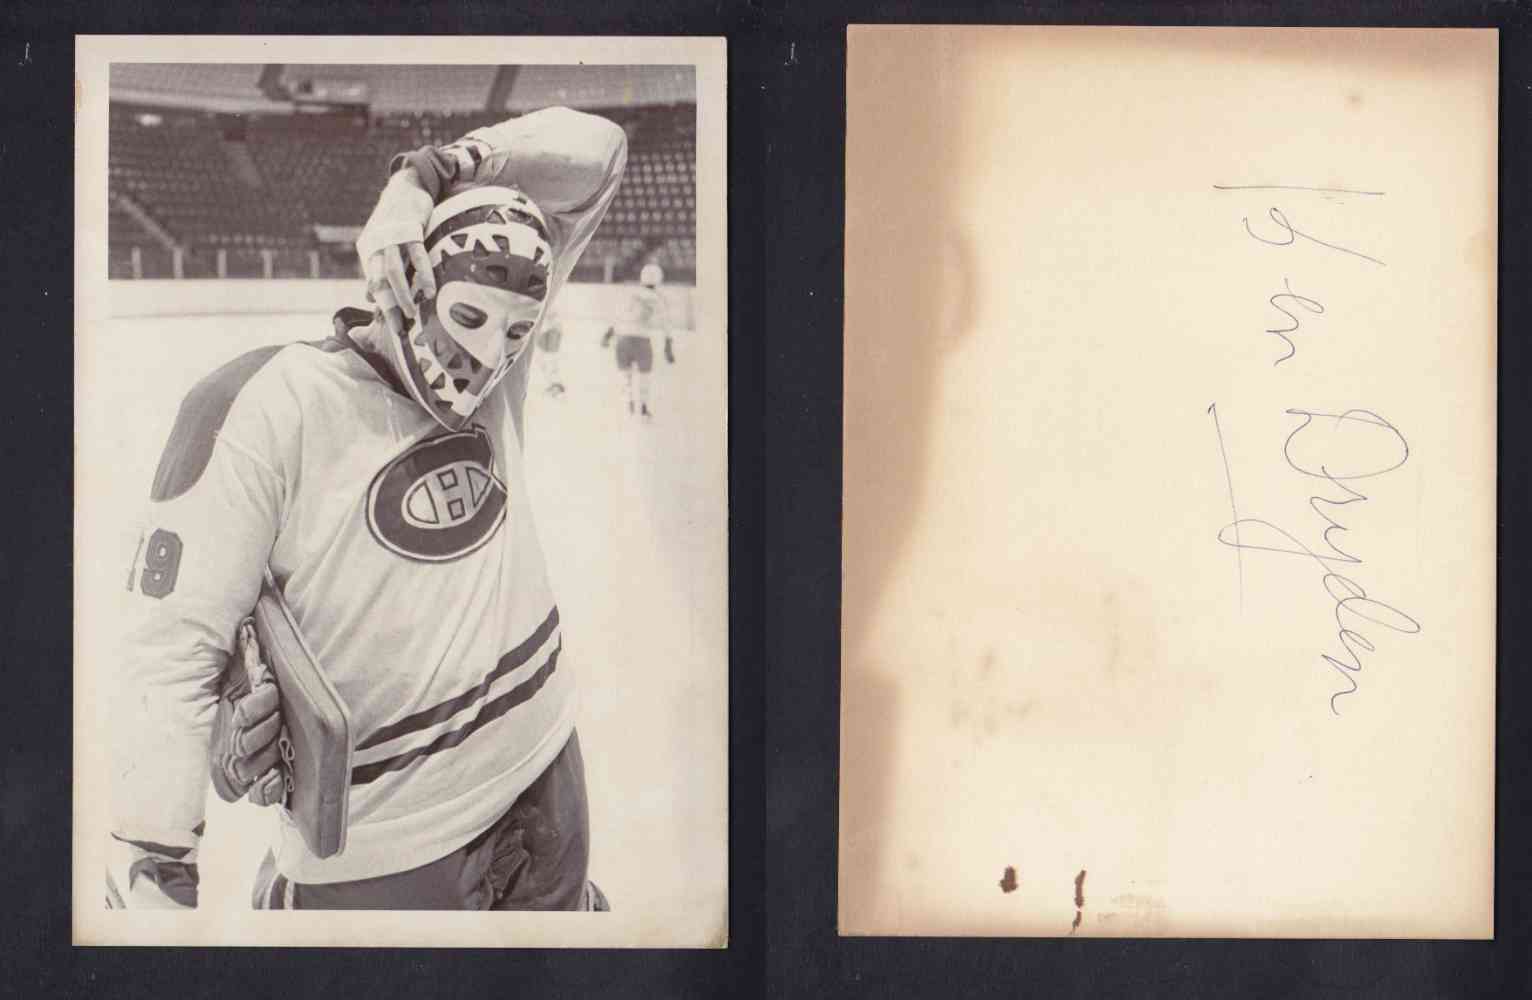 EARLY 1970'S MONTREAL CANADIENS K. DRYDEN PHOTO photo